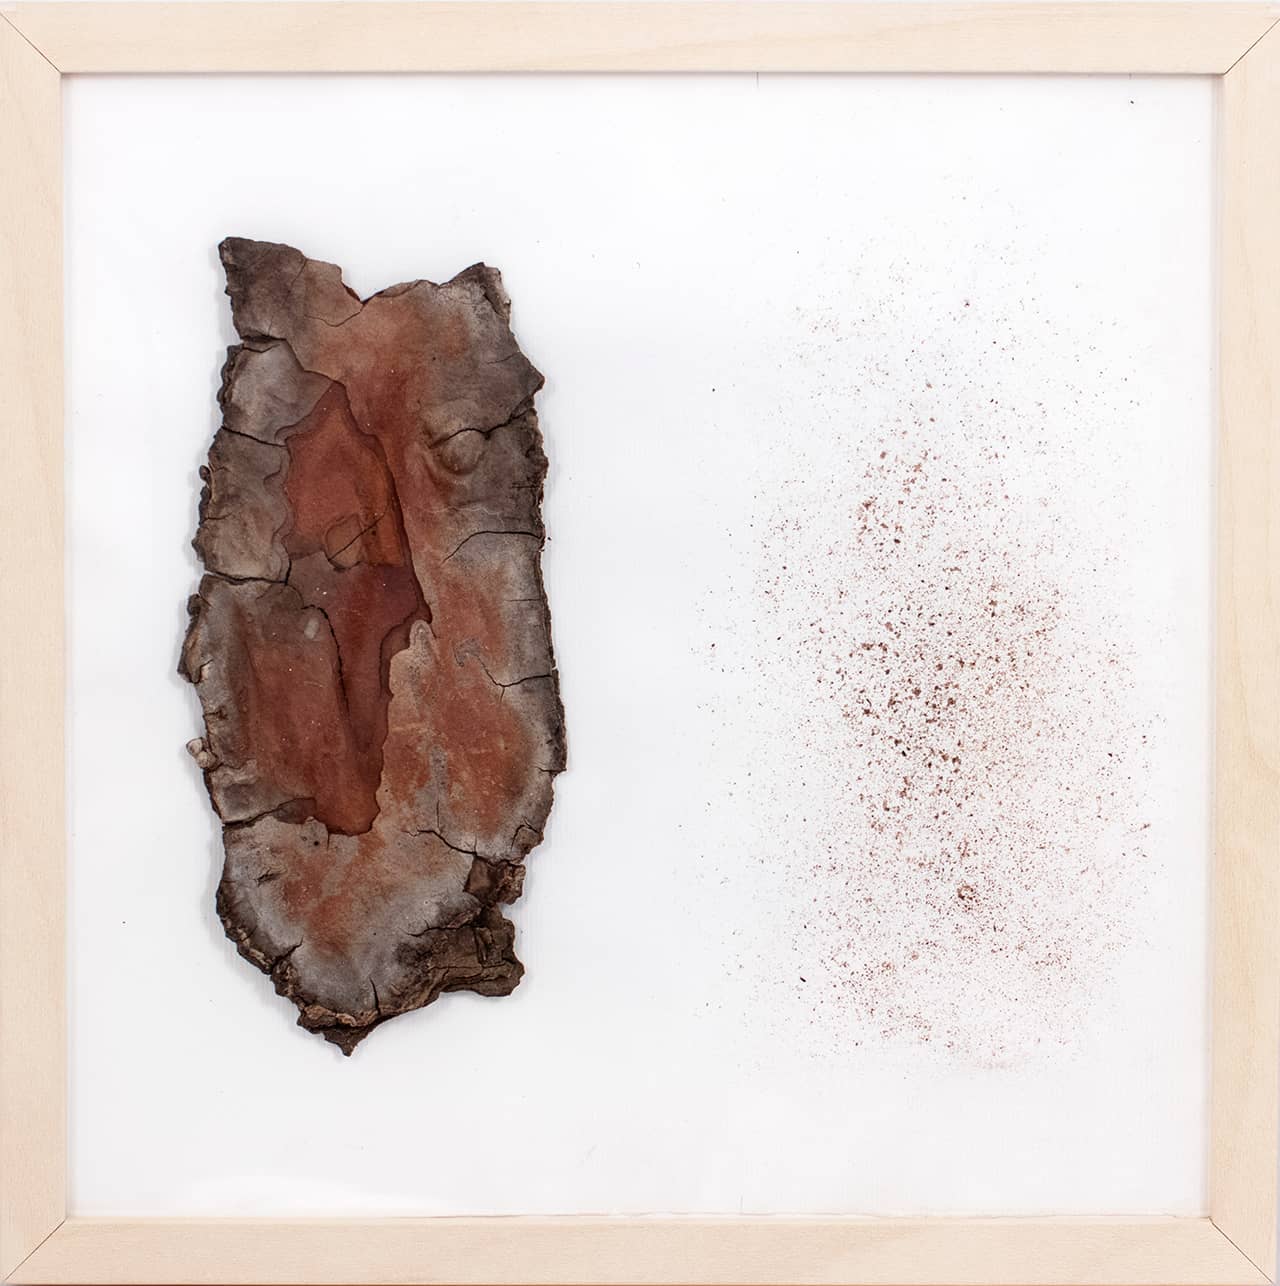 'Pinus Pinea', assemblage (pine bark and natural pigment on paper, framed). Artwork by Francesca Virginia Coppola